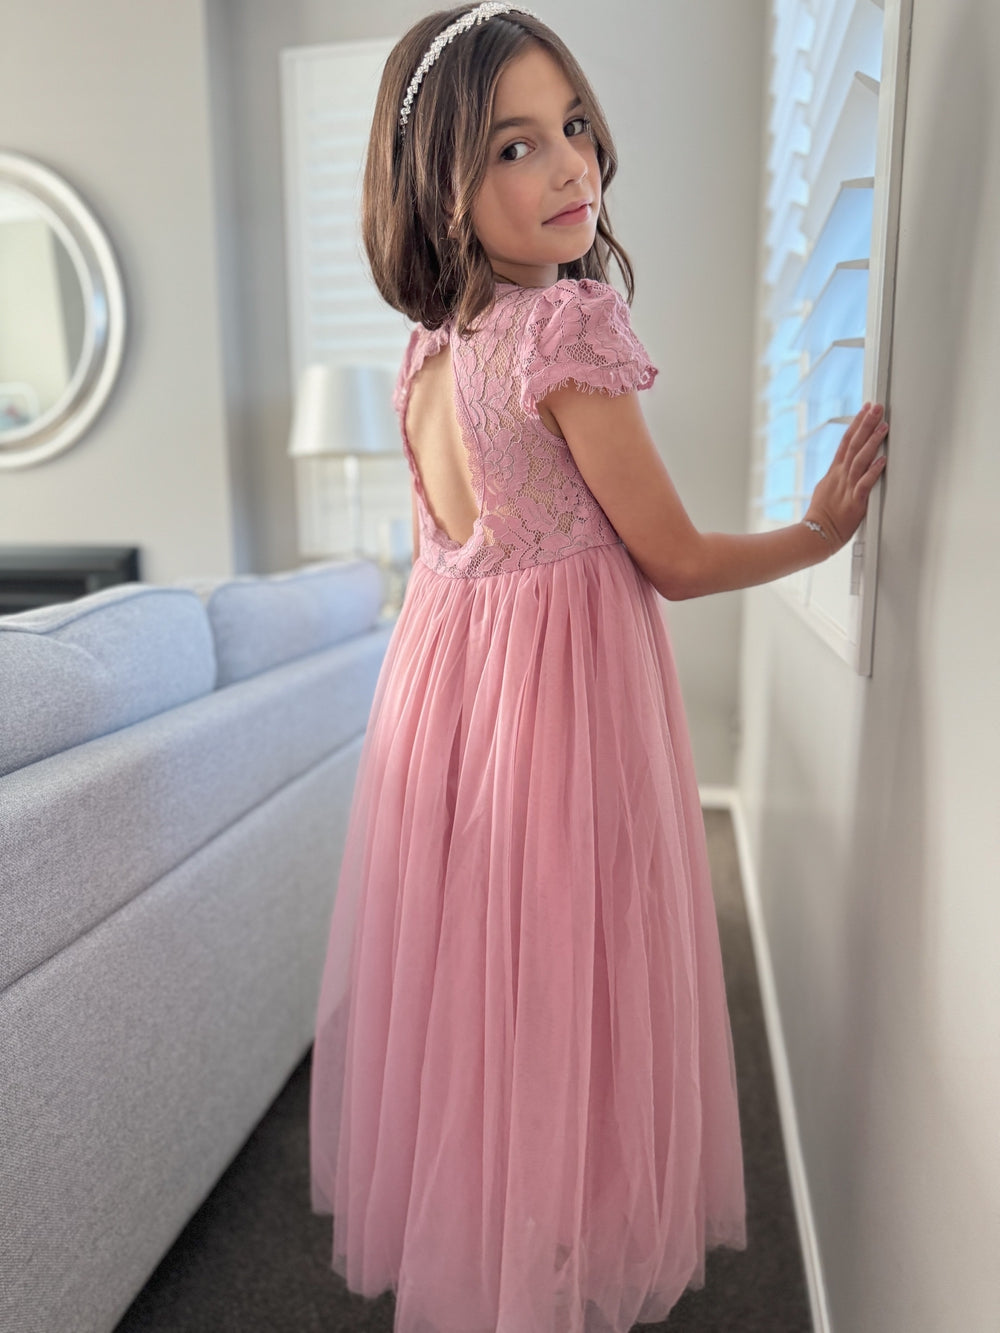 Serenade Girls Dusty Rose Lace Dress - New Arrivals